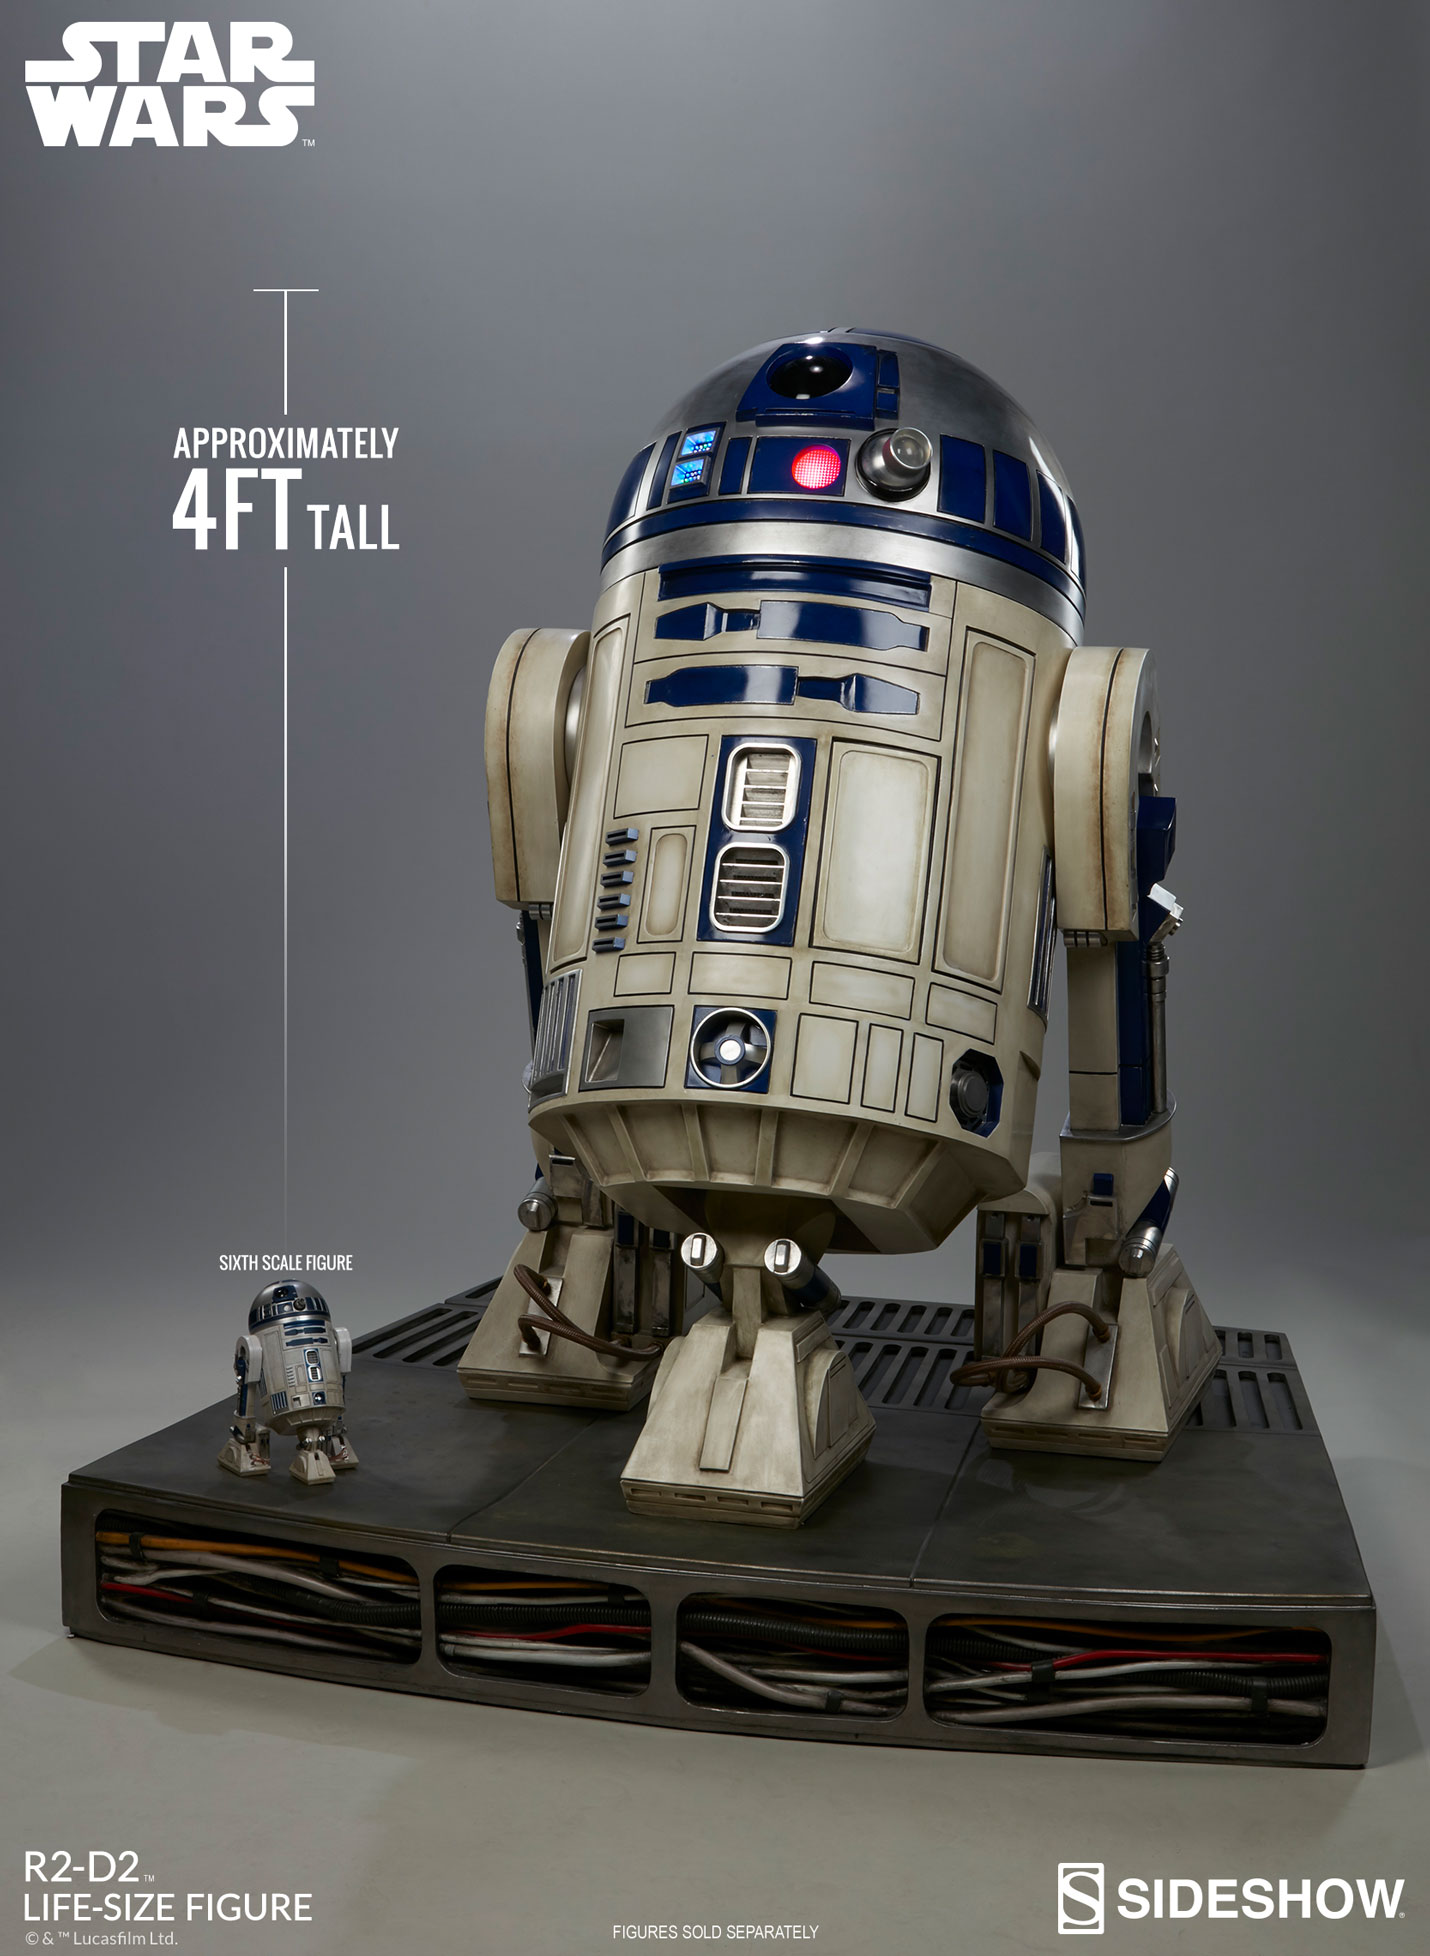 Look At This 1:1 R2-D2 ‘Figure’ (If You Have $10,000 To Spend)